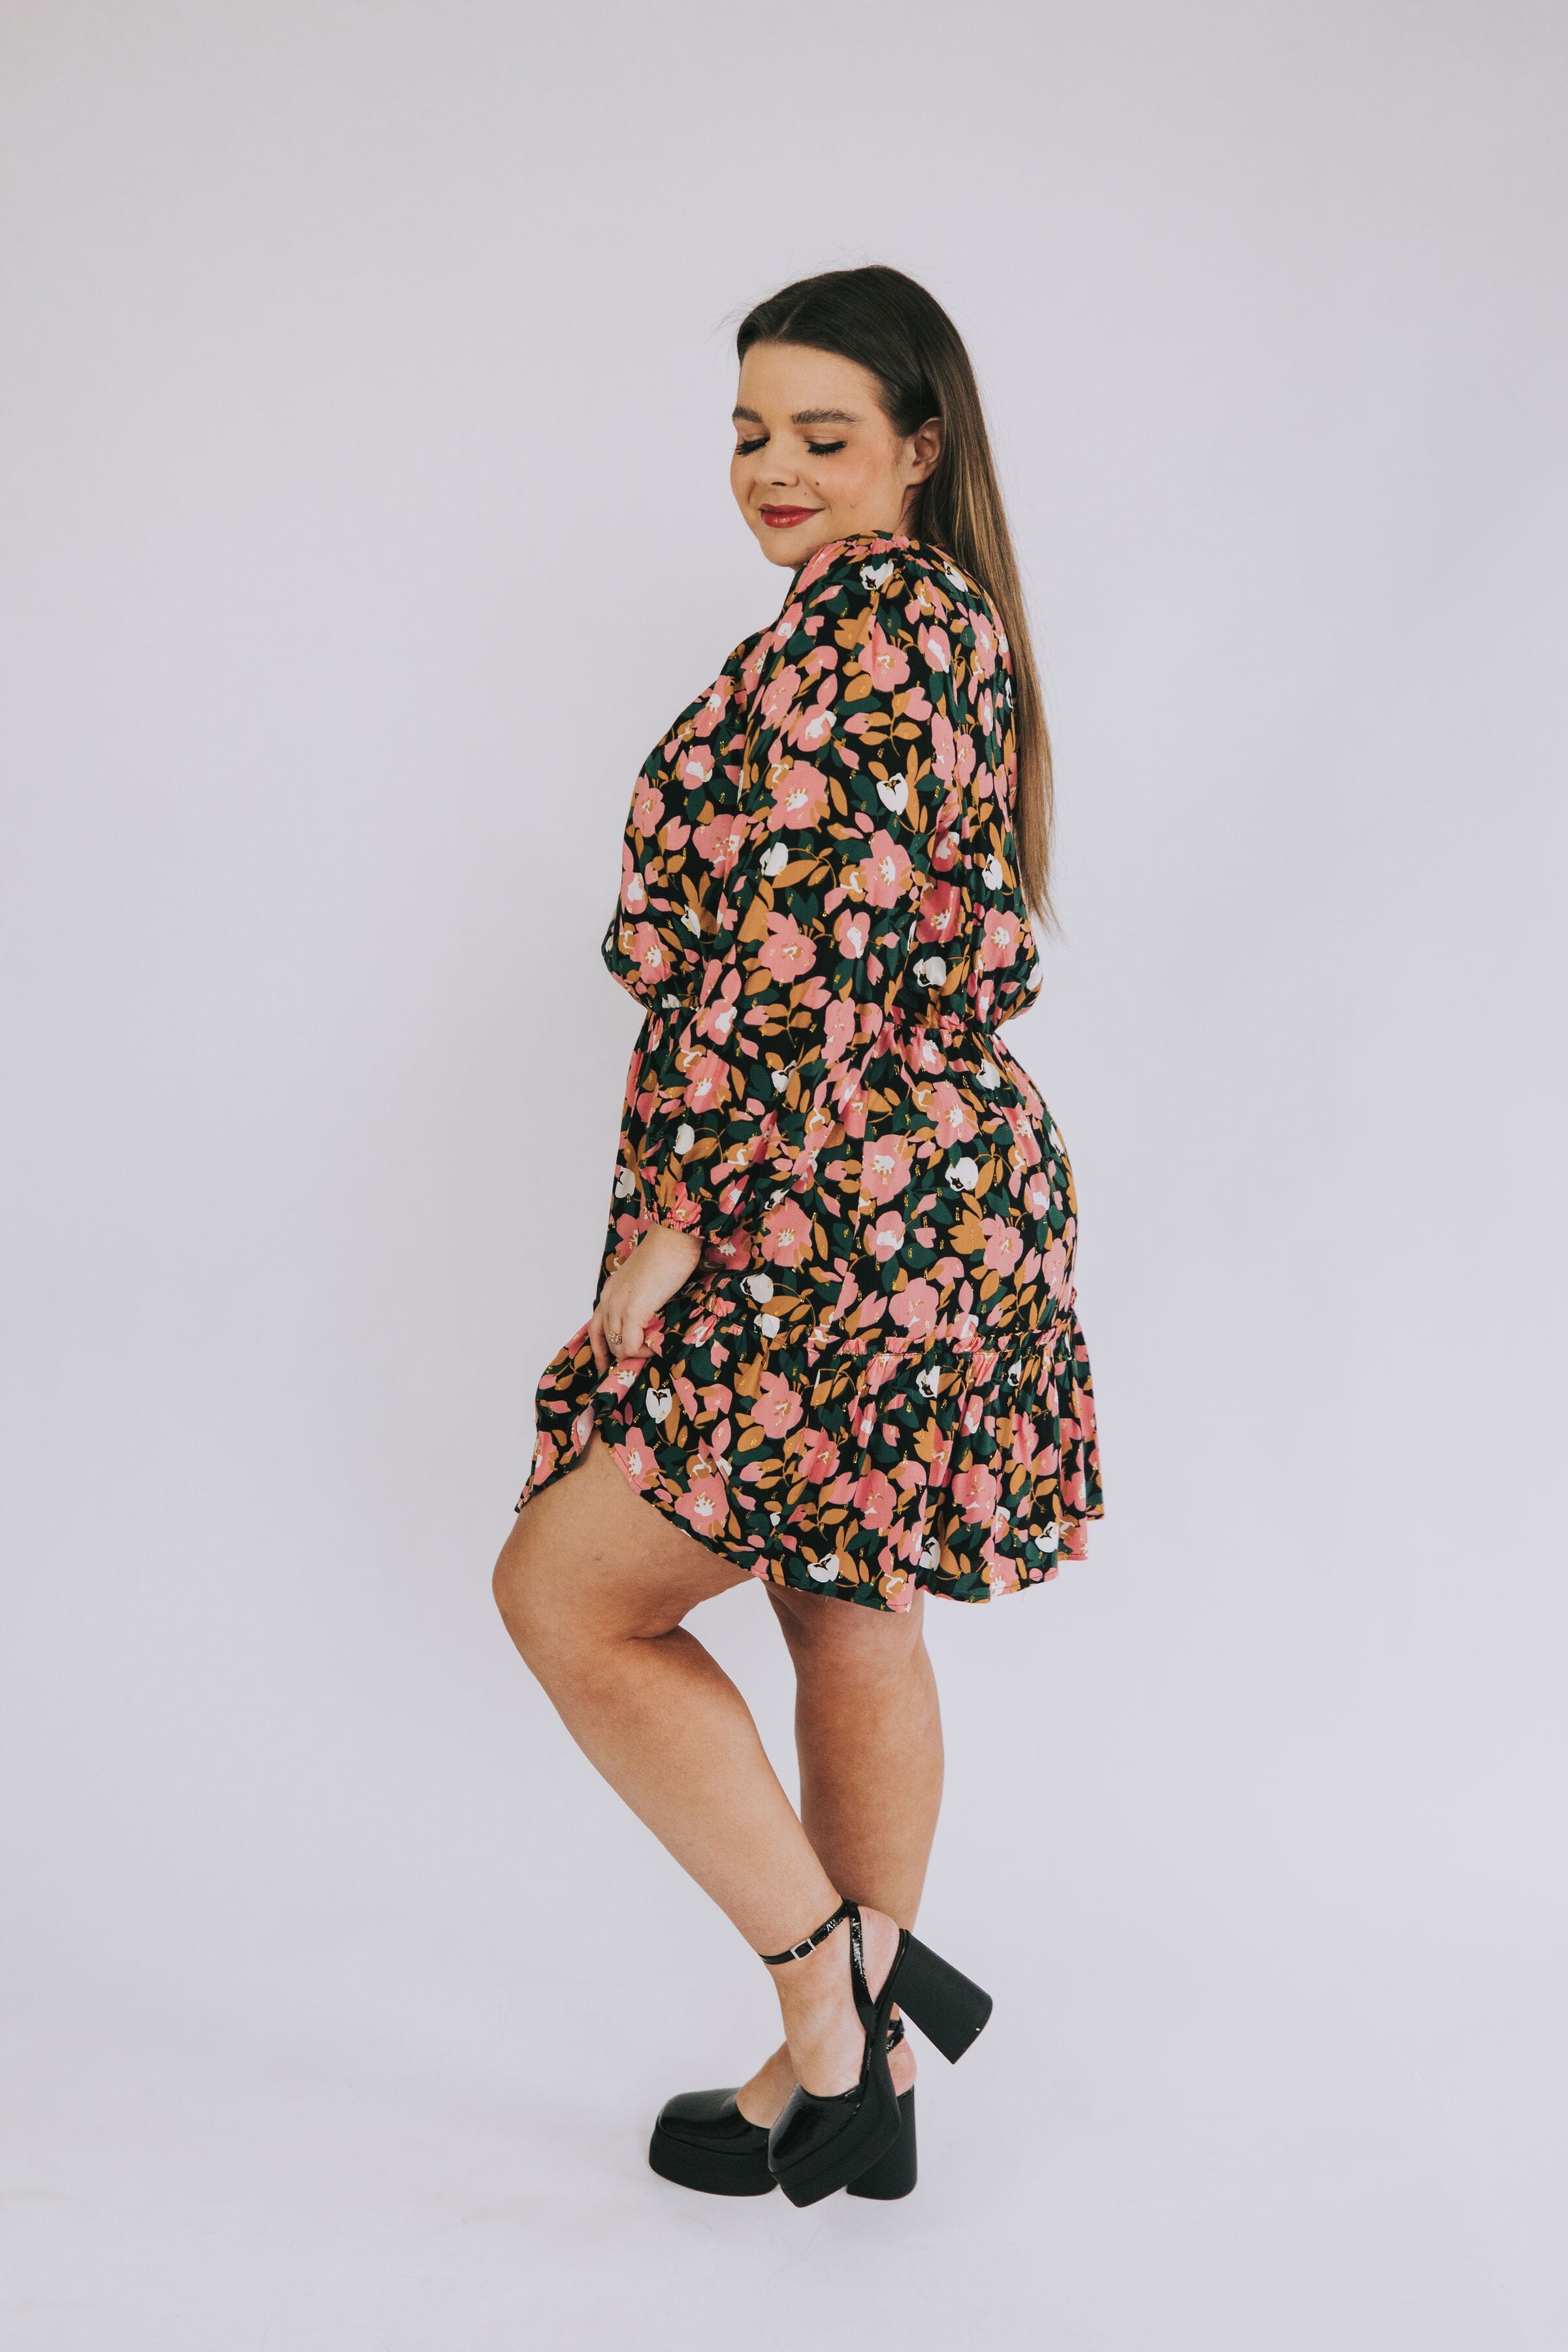 PLUS SIZE - Expecting You Dress